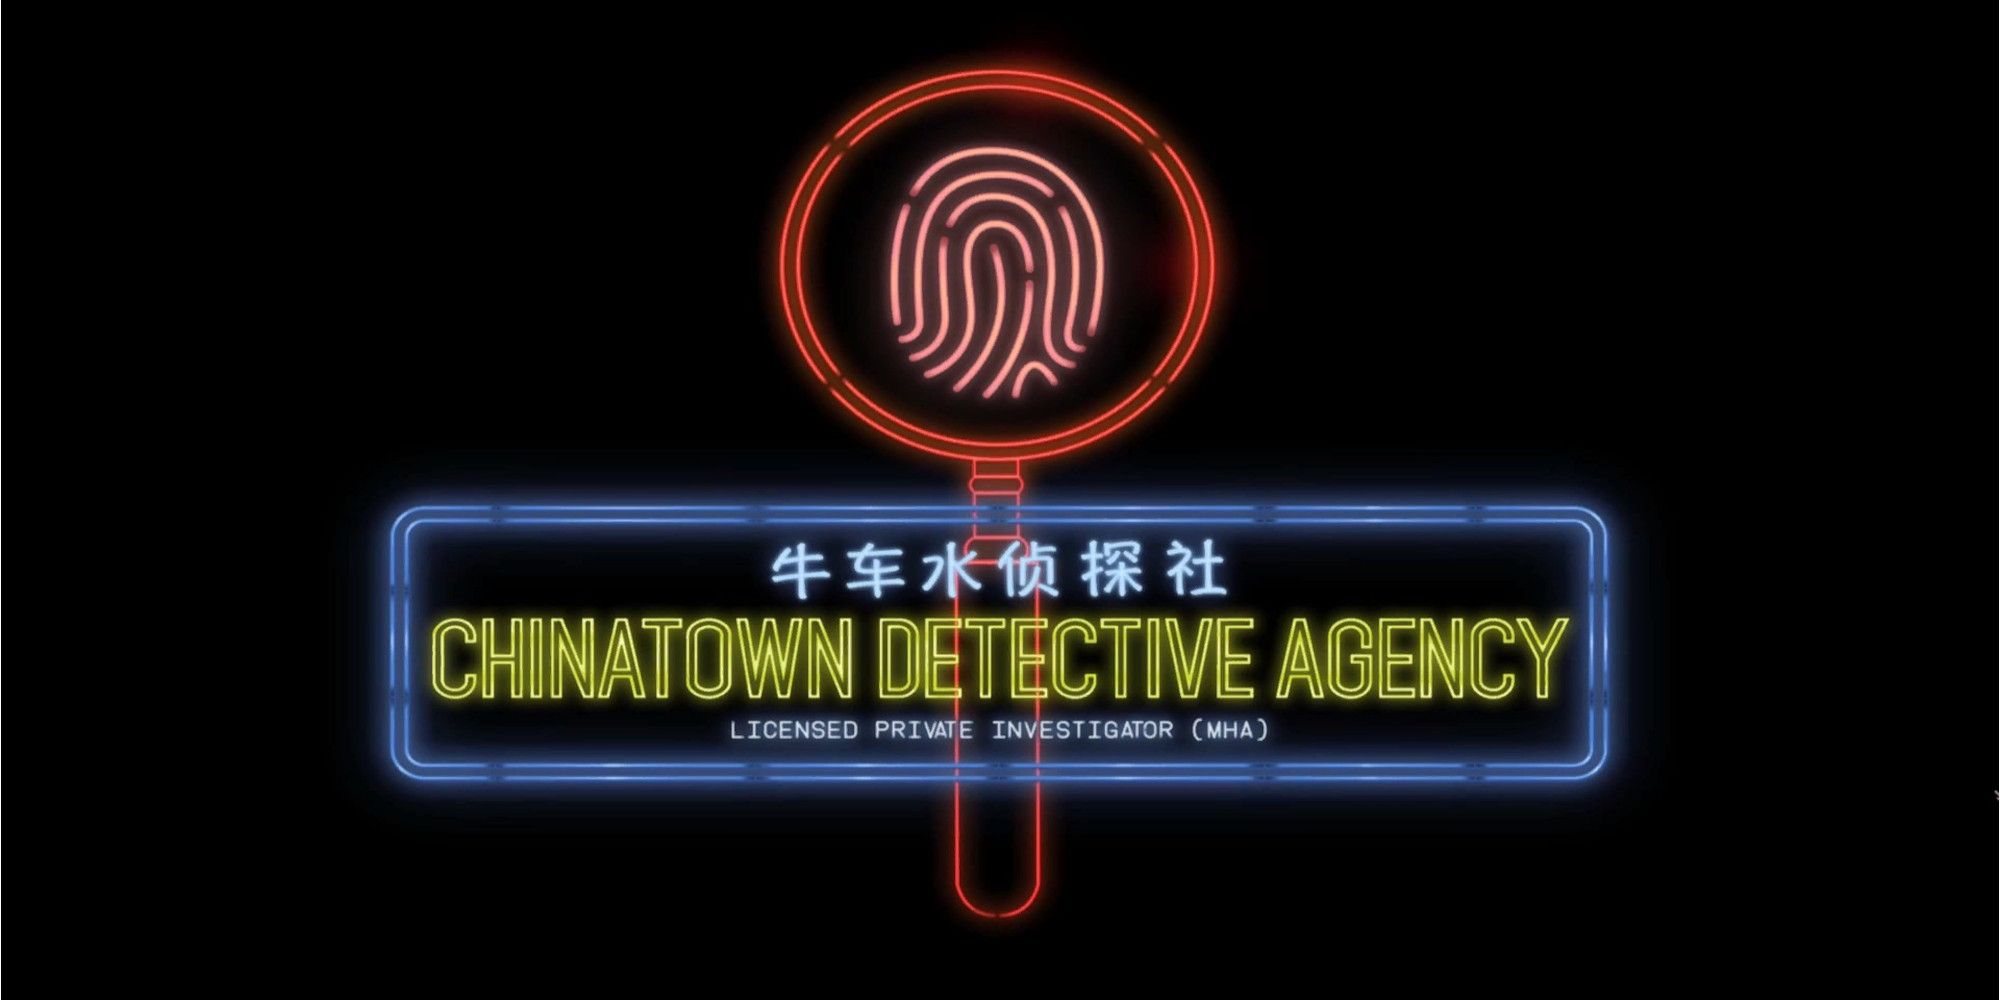 Chinatown Detective Agency, Licensed Private Investigator Title Screen, Neon Sign